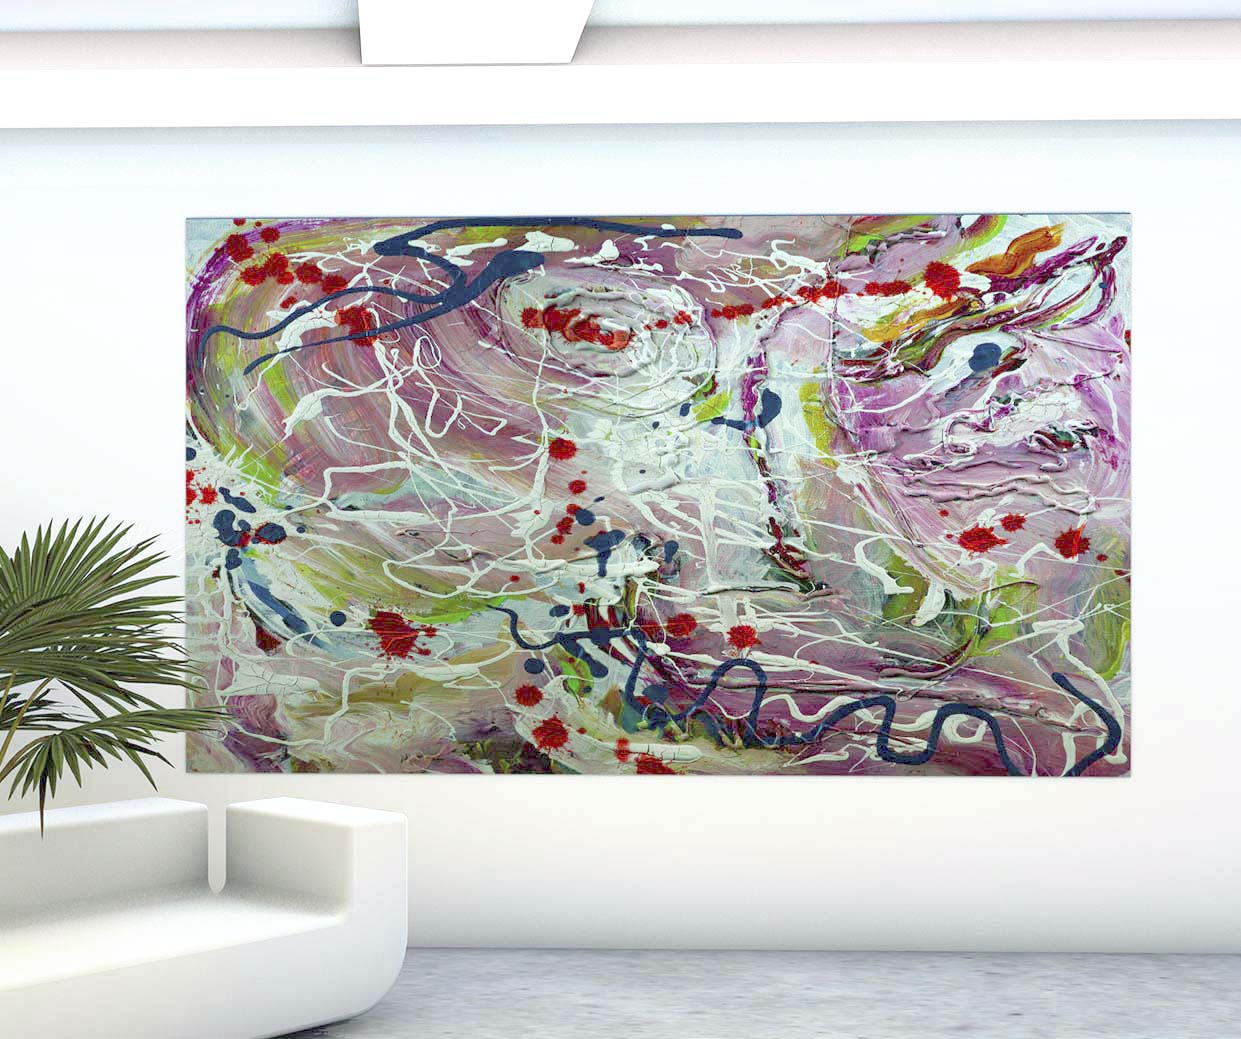 Pastel Loop abstract expressionist painting by Doug LaRue in a gallery setting